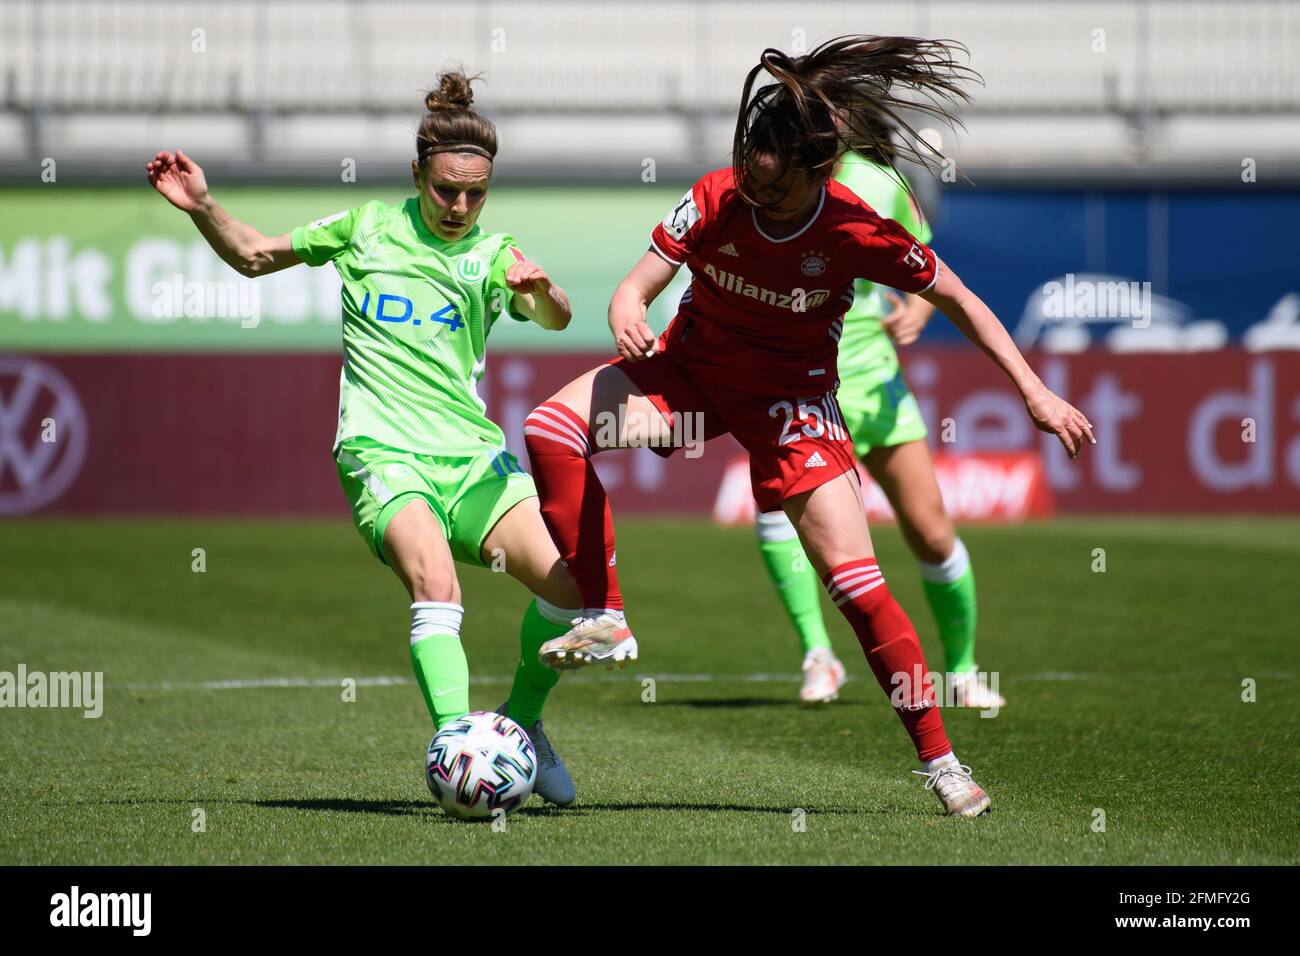 Wolfratshausen, Germany. 09th May, 2021. Football, Women: Bundesliga, VfL Wolfsburg - FC Bayern Munich, matchday 20 at AOK Stadion. Munich's Sarah Zadrazil (r) plays against Wolfsburg's Svenja Huth. Credit: Swen Pförtner/dpa - IMPORTANT NOTE: In accordance with the regulations of the DFL Deutsche Fußball Liga and/or the DFB Deutscher Fußball-Bund, it is prohibited to use or have used photographs taken in the stadium and/or of the match in the form of sequence pictures and/or video-like photo series./dpa/Alamy Live News Stock Photo